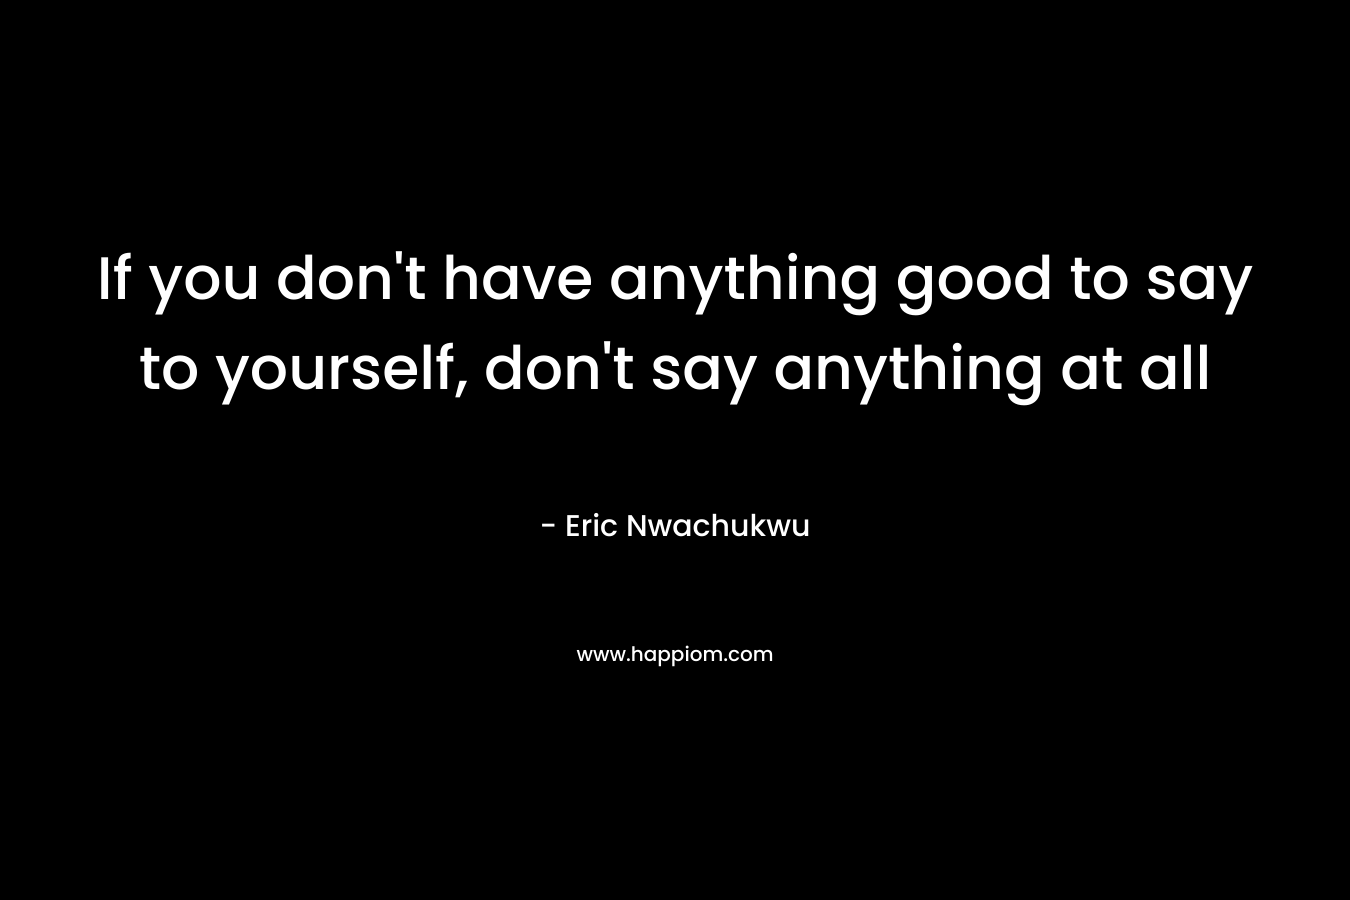 If you don’t have anything good to say to yourself, don’t say anything at all – Eric Nwachukwu